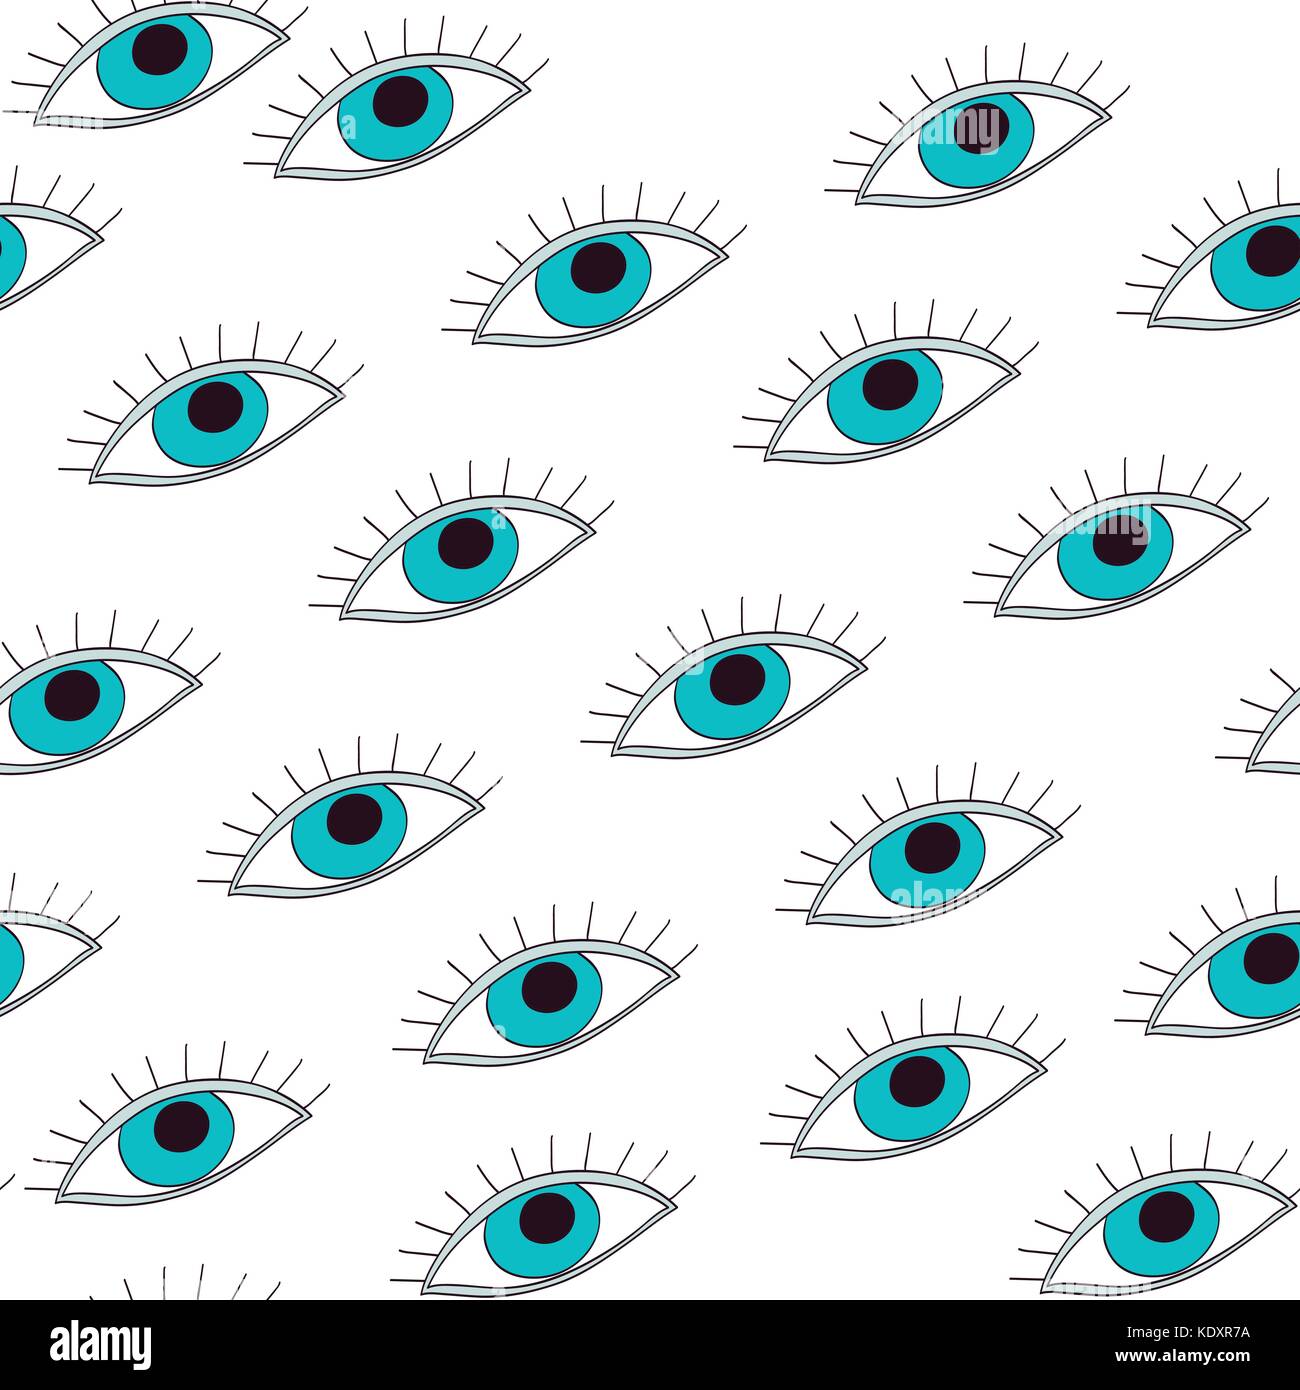 Vector Simple Flat Blue Outline Evil Eye Icons Linear Open Closed Eyes  Images Sleeping Eye Shapes with Eyelash Stock Vector  Illustration of  concept shape 282604784